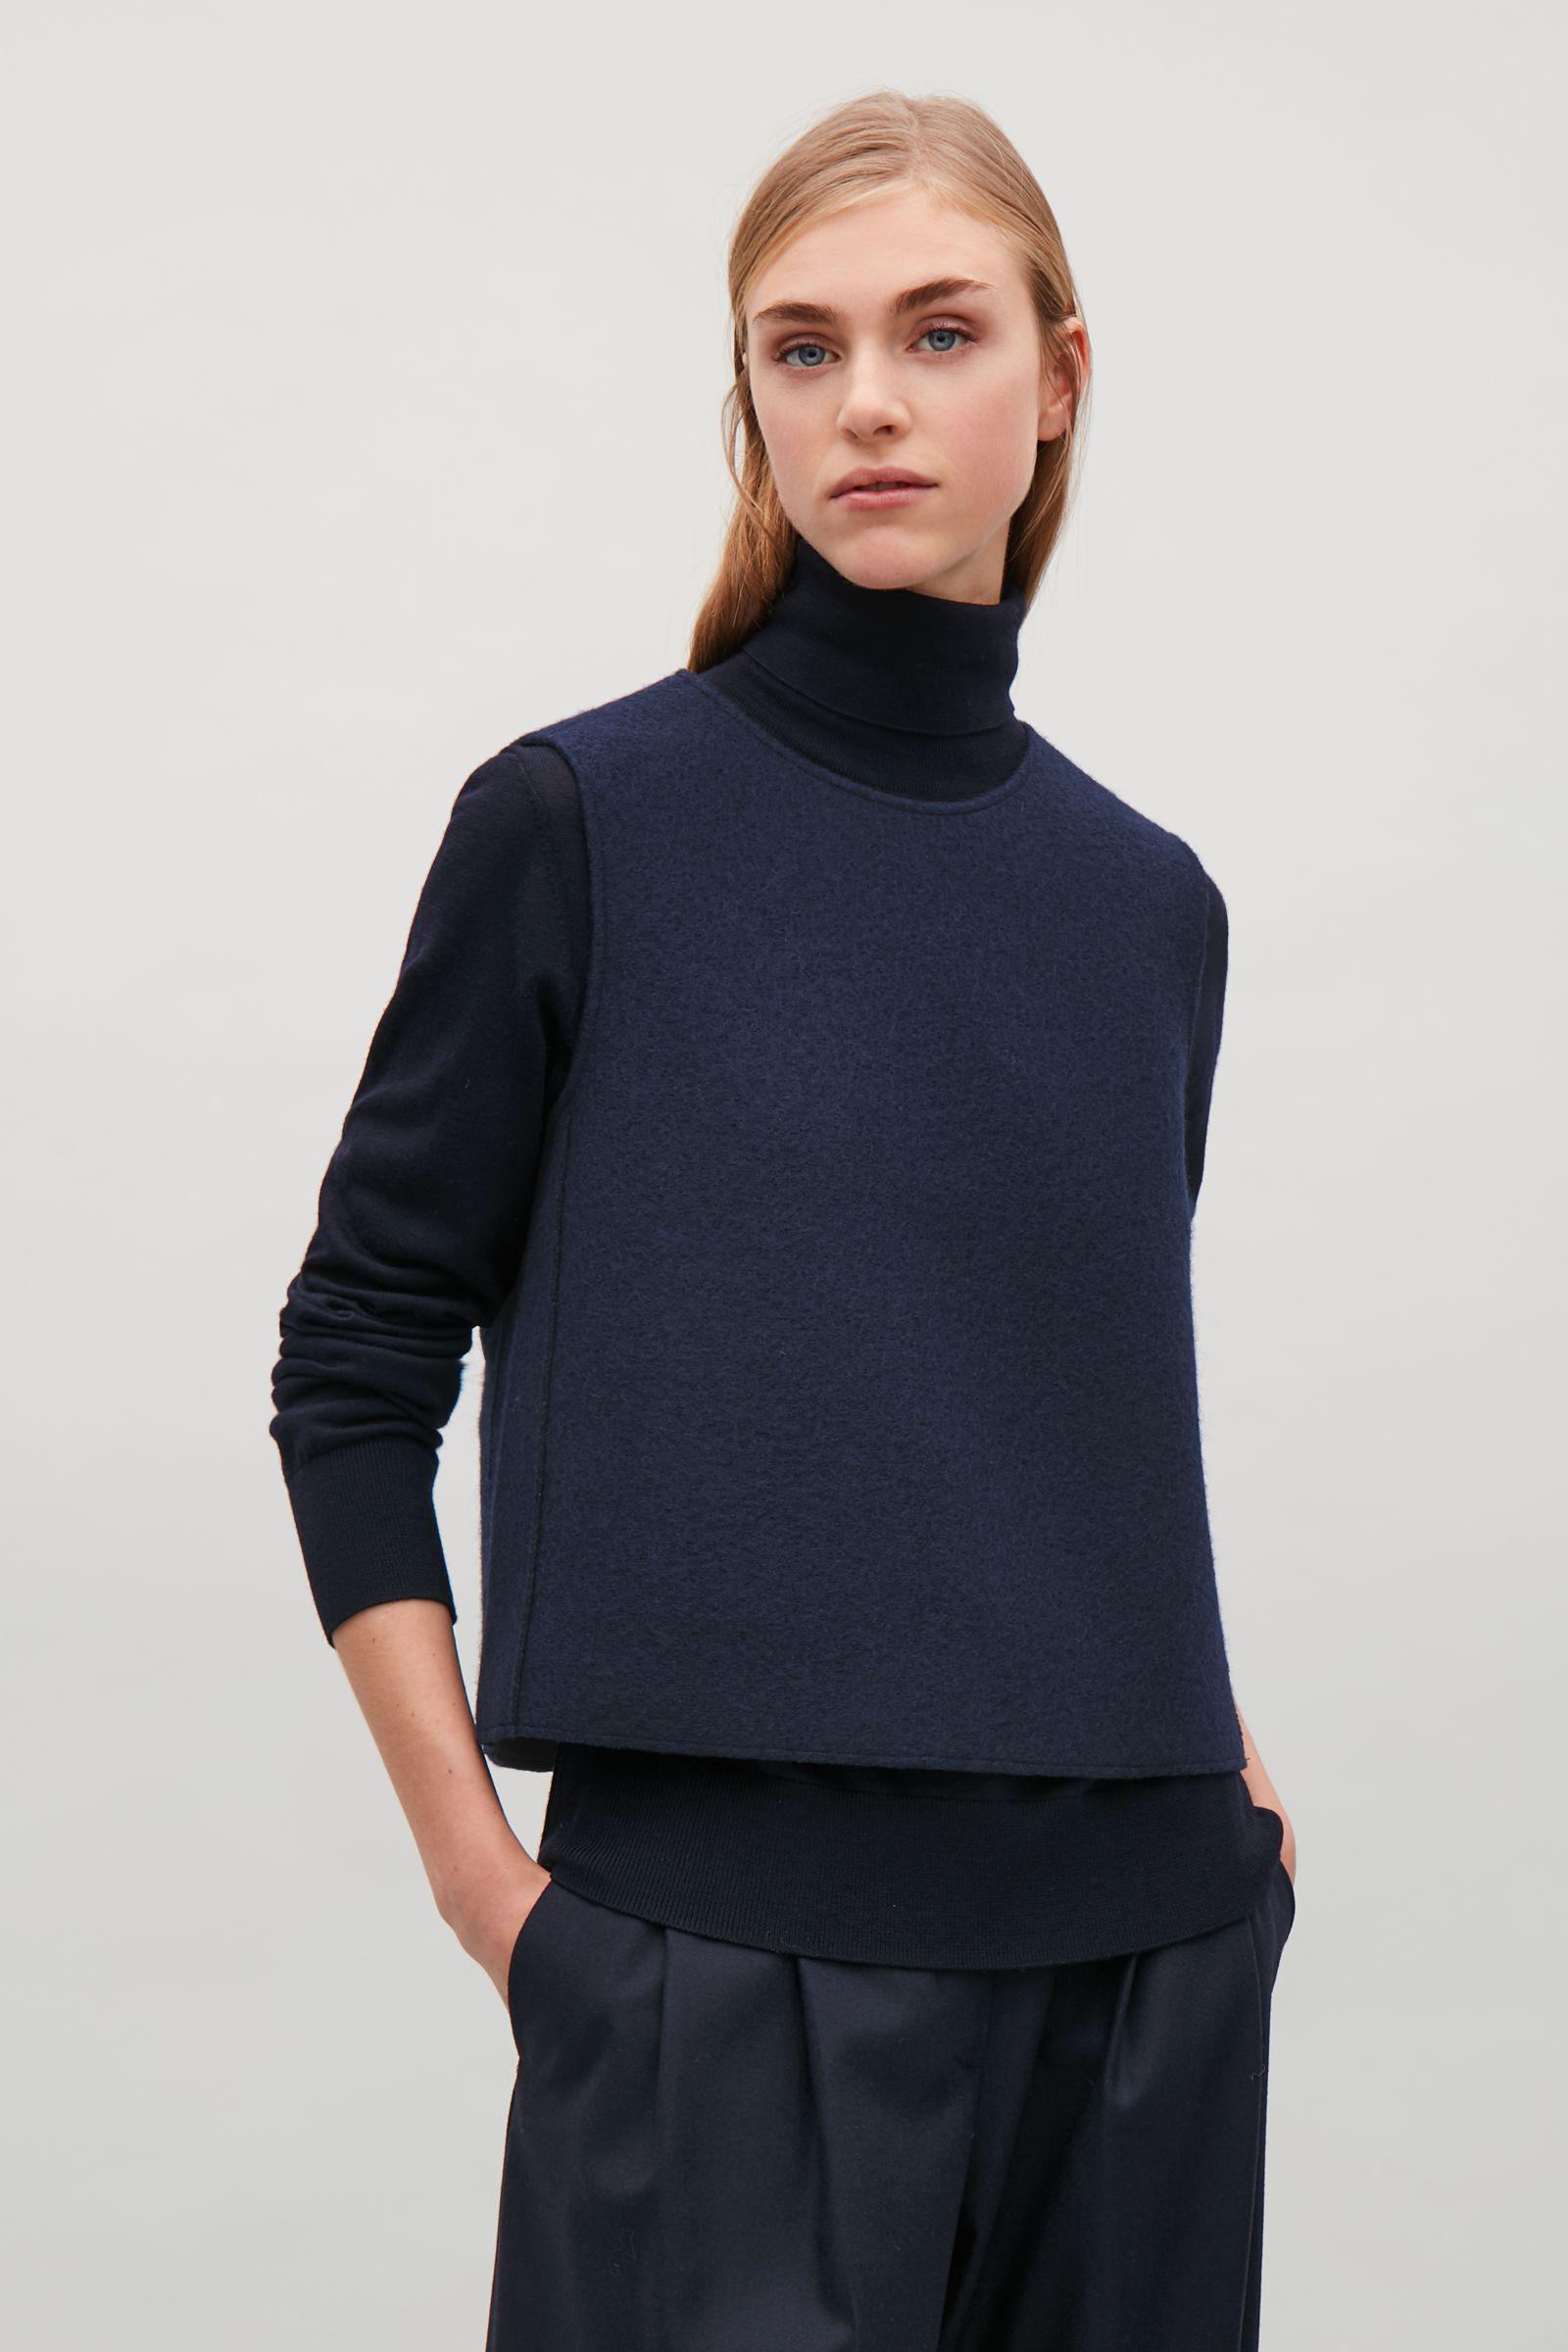 COS Panelled Wool Vest Top in Navy (Blue) - Lyst